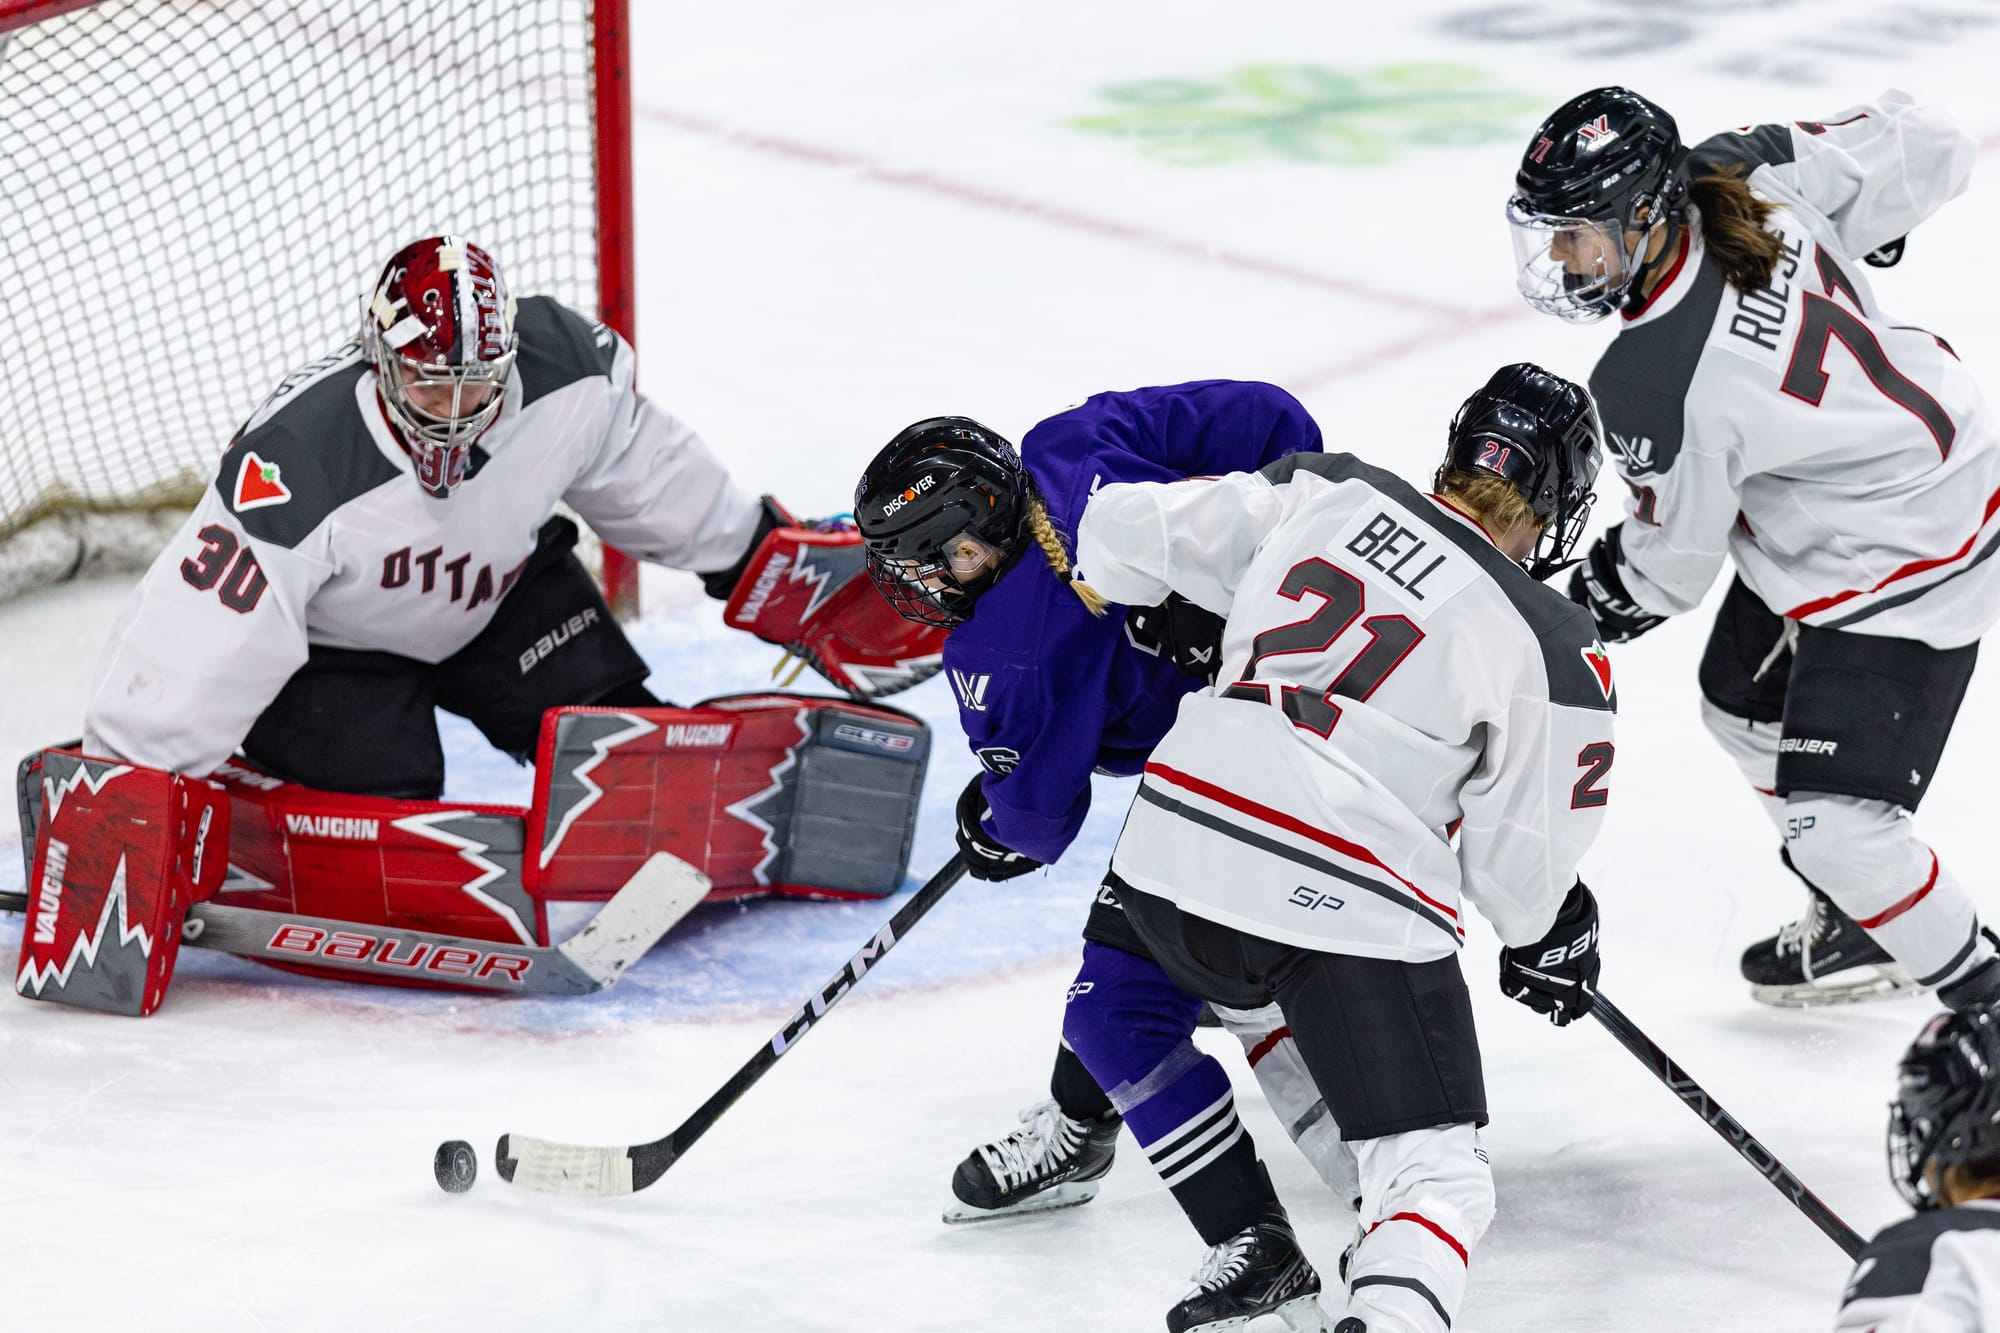 Sandra Abstreiter makes a save on Kendal Coyne Schofield as Ottawa players try to defend. Abstreiter is on her knees while Schofield is hunched over ready to shoot. There are two Ottawa players behind her. Ottawa is in white, while Schofield is in purple. Abstreiter is also wearing red and black pads and a red and white mask.